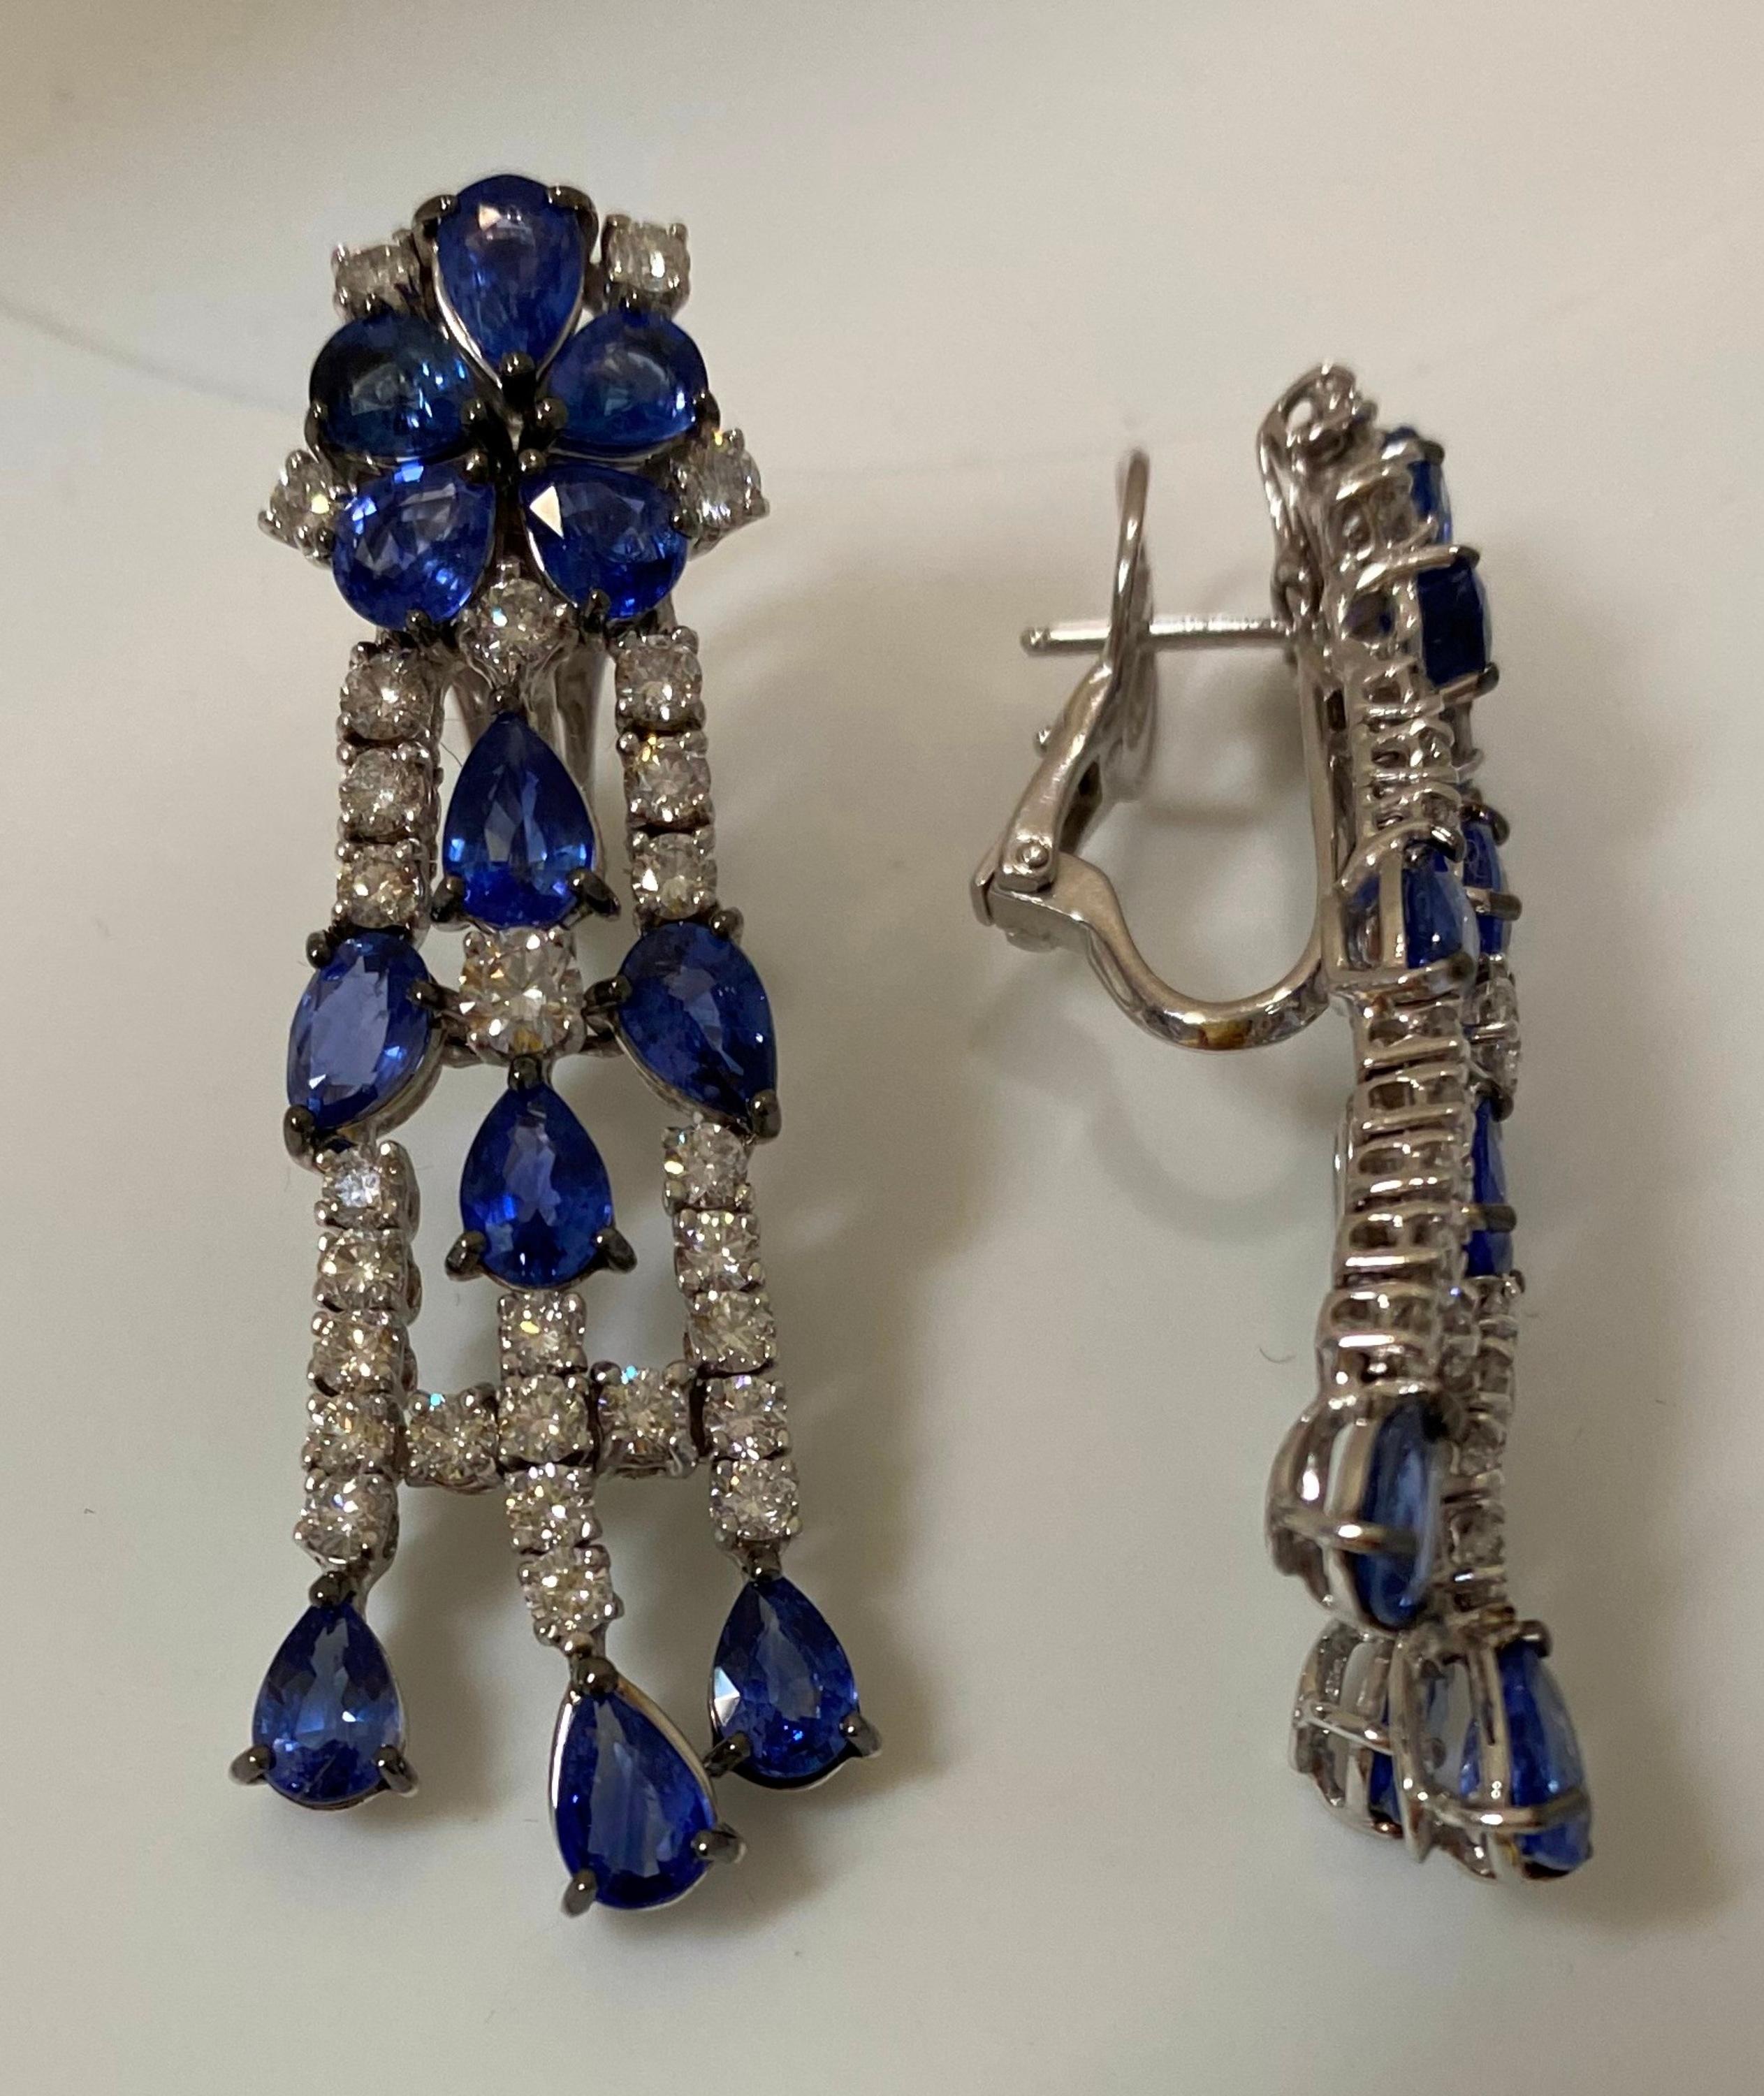 18 Karat White Gold Diamond and Sapphire Dangle Earrings

54  Diamonds 3,23 Carat H SI
24 Sapphires  12,14 Carat


Founded in 1974, Gianni Lazzaro is a family-owned jewelry company based out of Düsseldorf, Germany.
Although rooted in Germany, Gianni